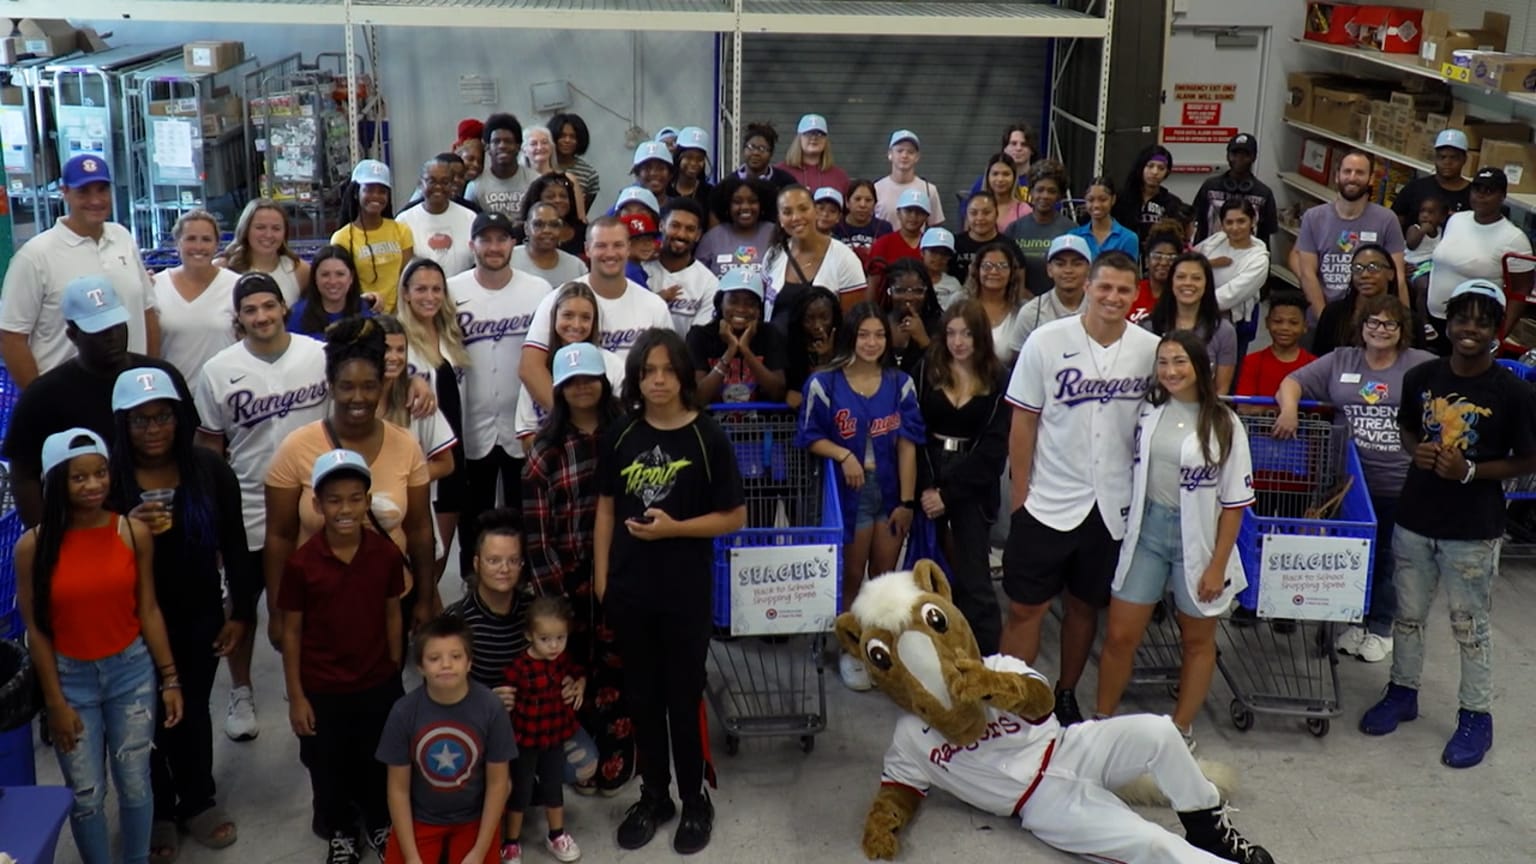 Corey Seager gives Academy shopping spree to students